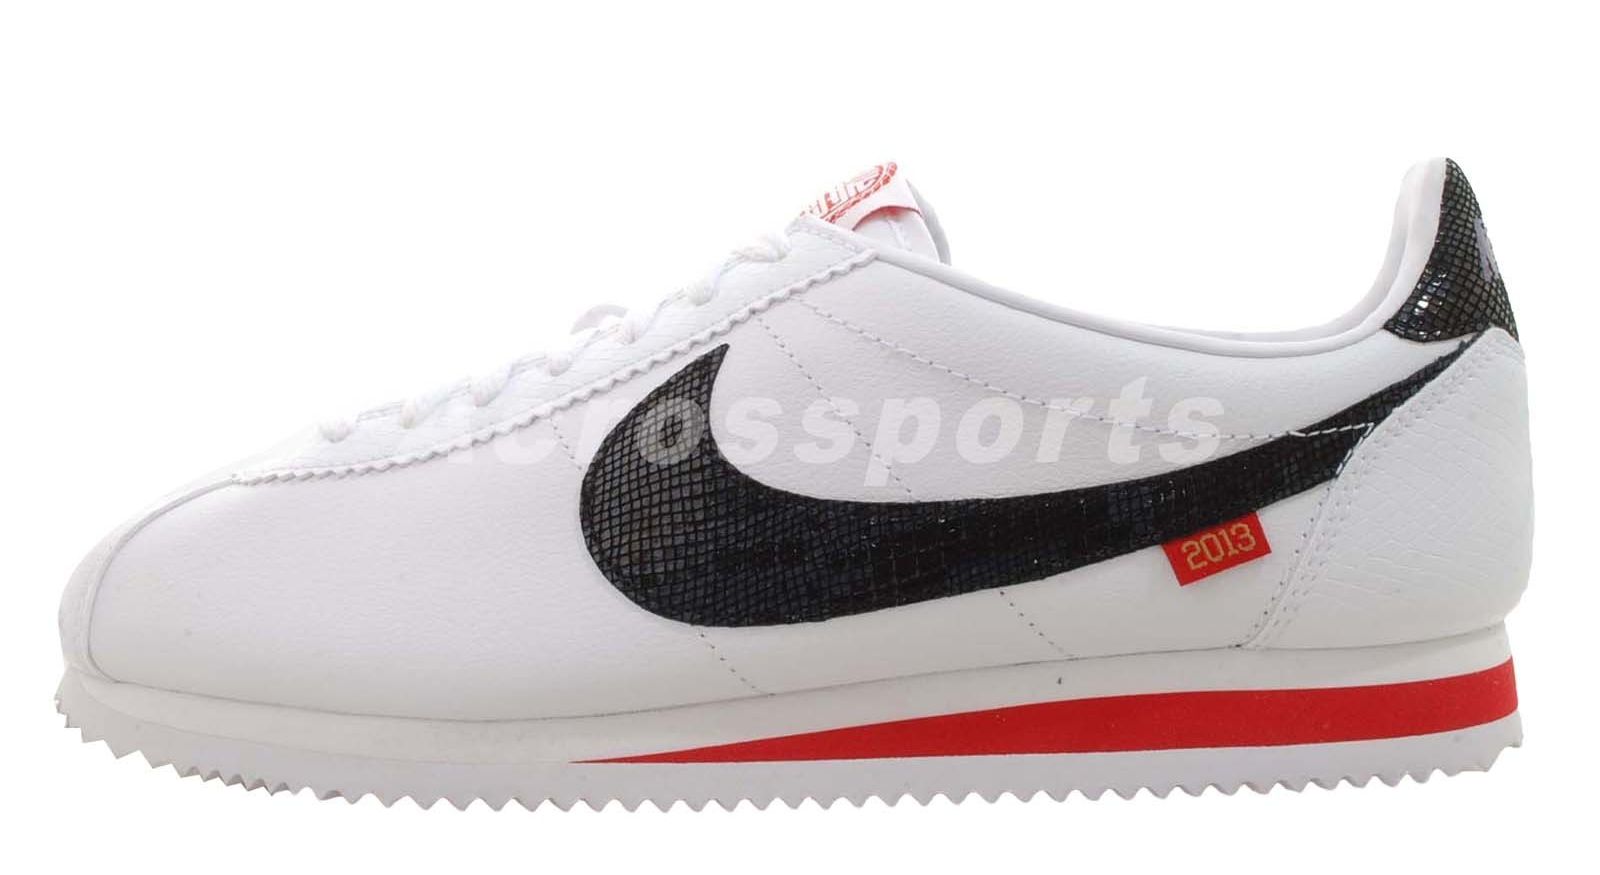 Nike Cortez Year Of The Snake 05